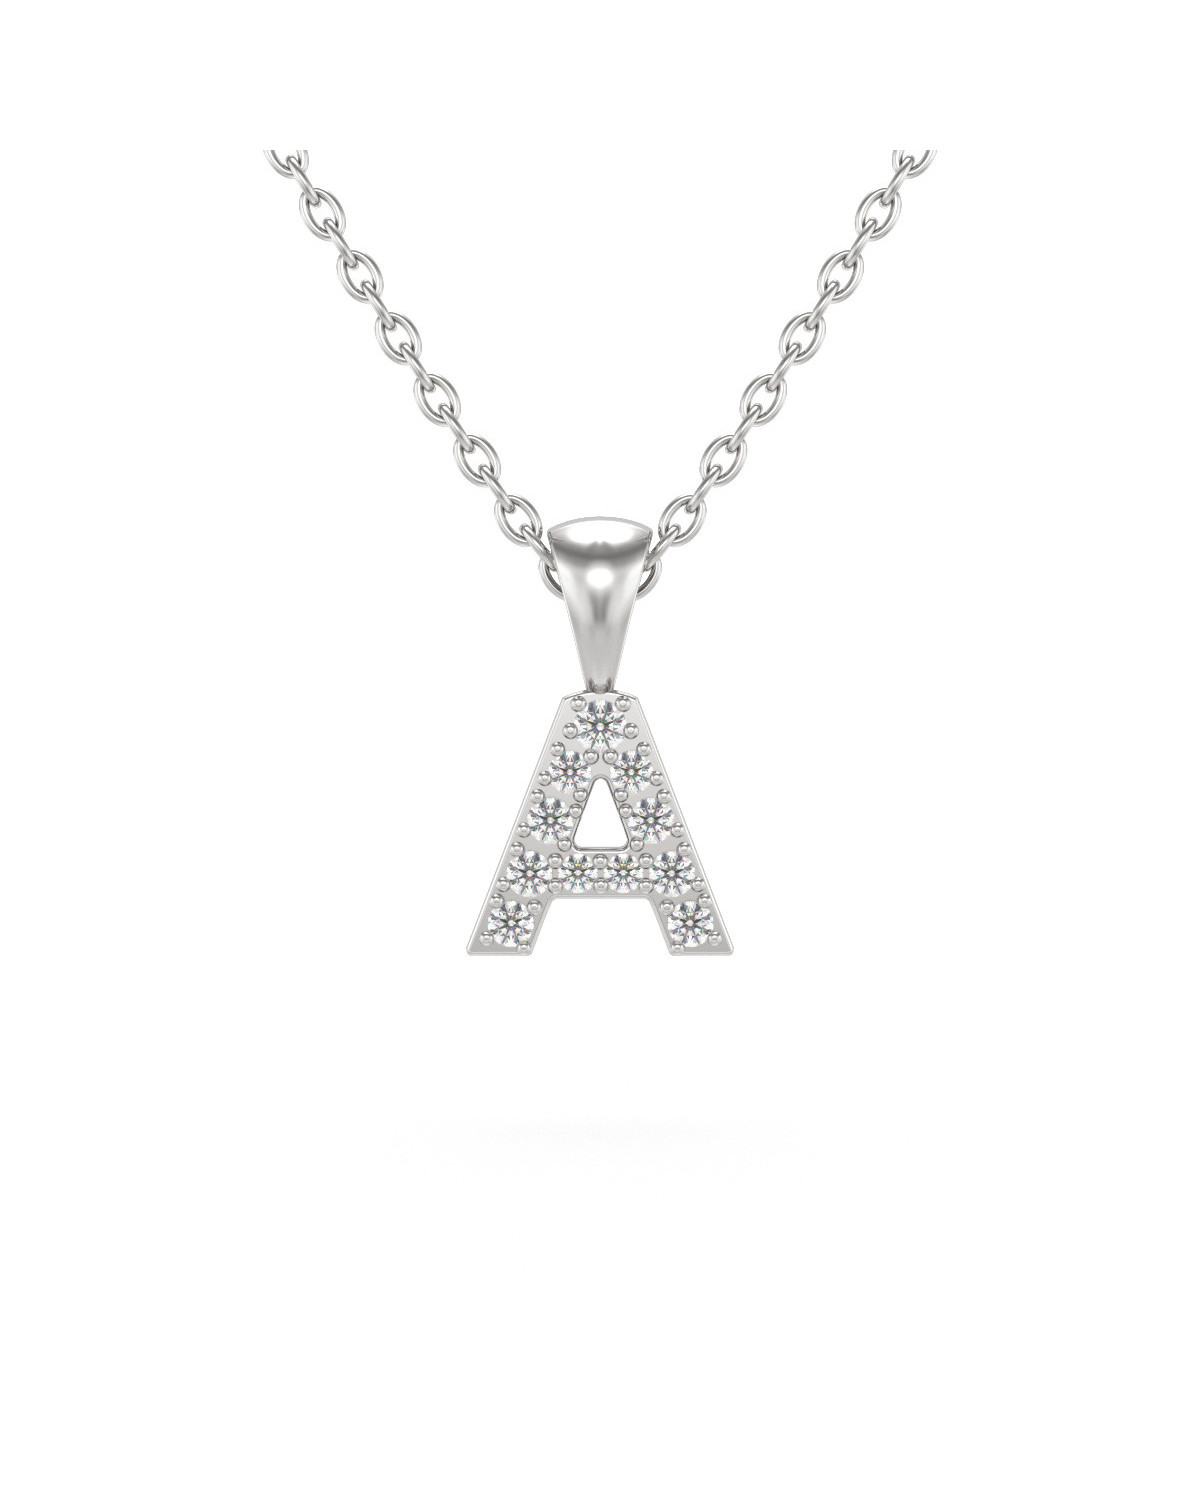 Collier Pendentif Lettre A Or Blanc Diamant Chaine Or incluse 0.72grs